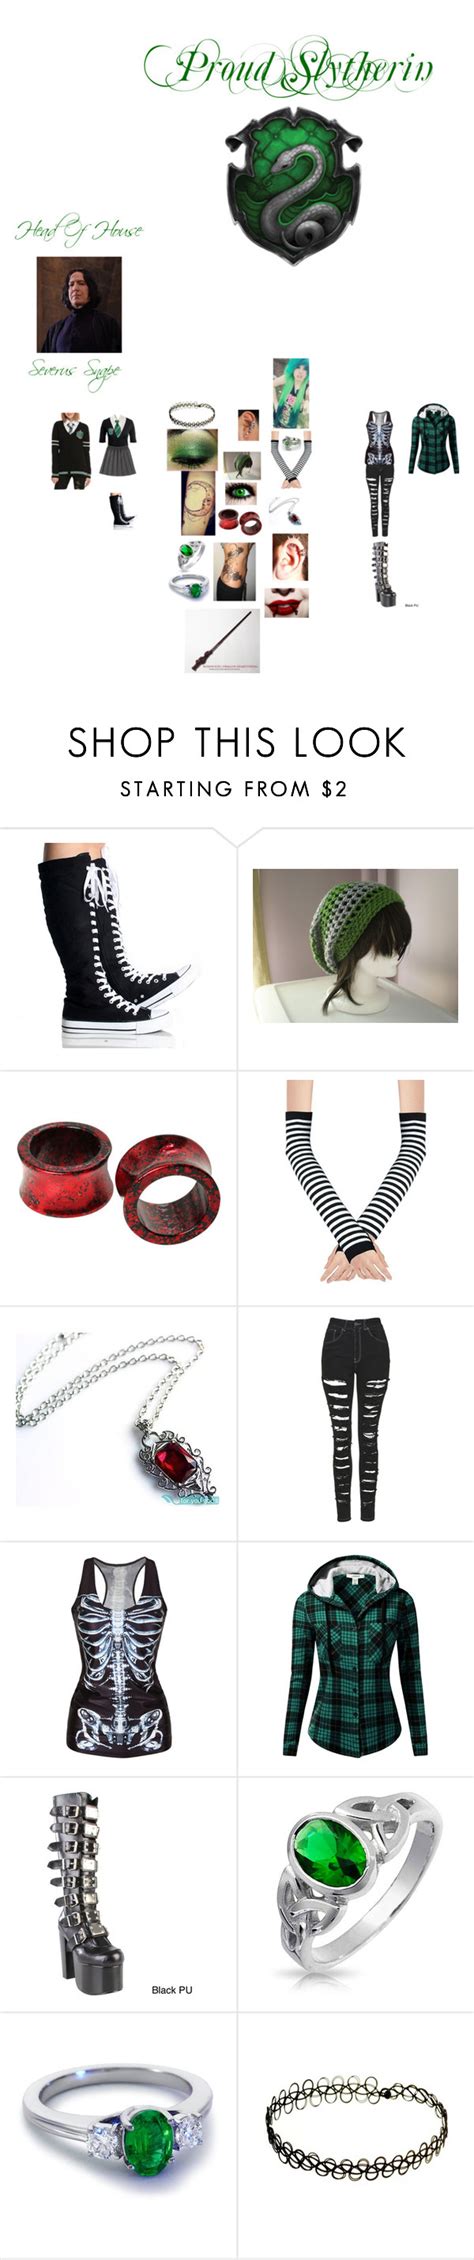 Luxury Fashion And Independent Designers Ssense Slytherin Uniform Indie Hair Outfits